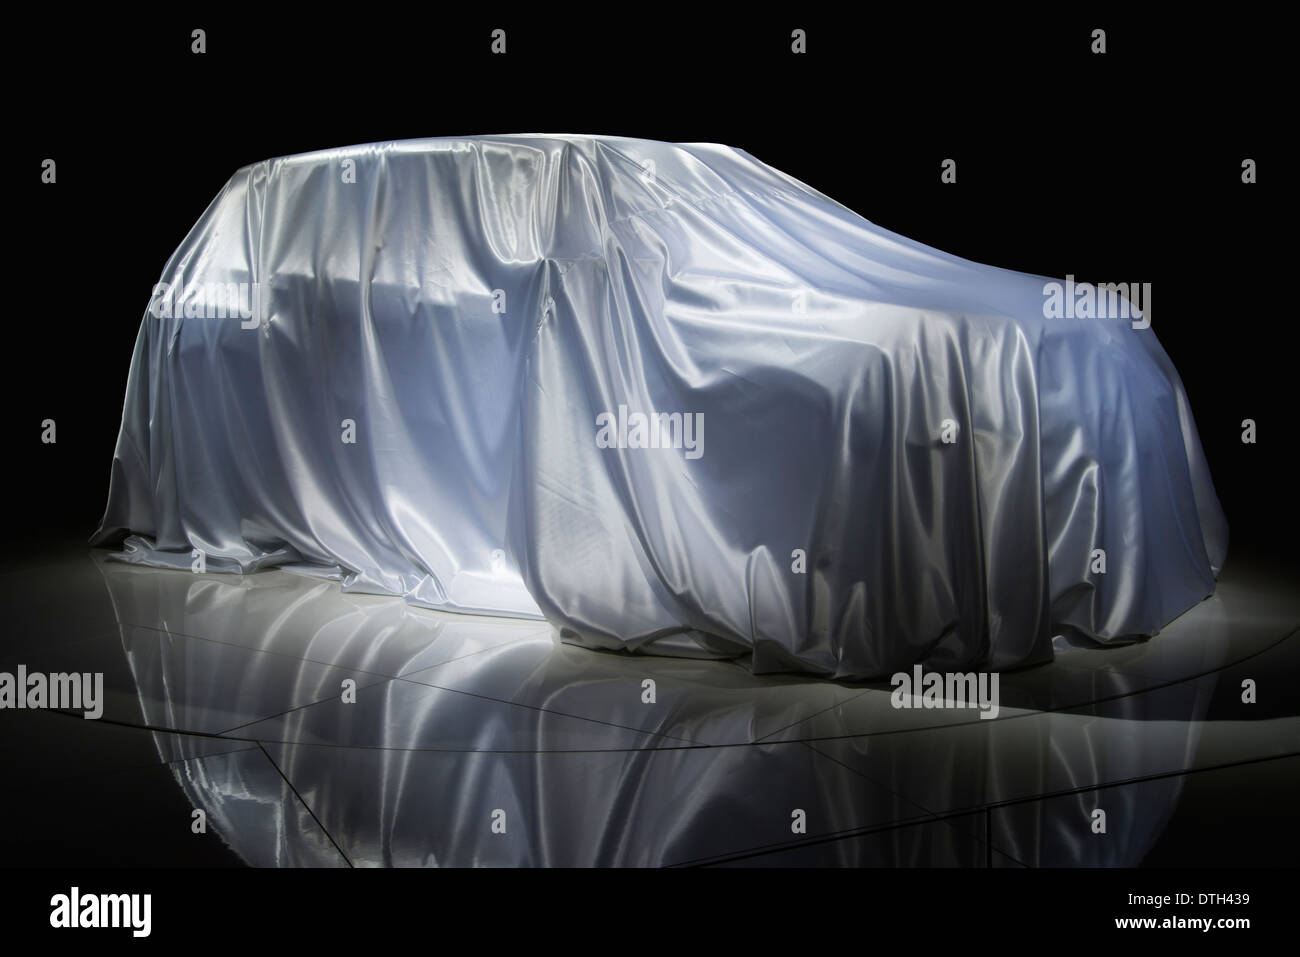 Car is covered with a white cloth. Stock Photo